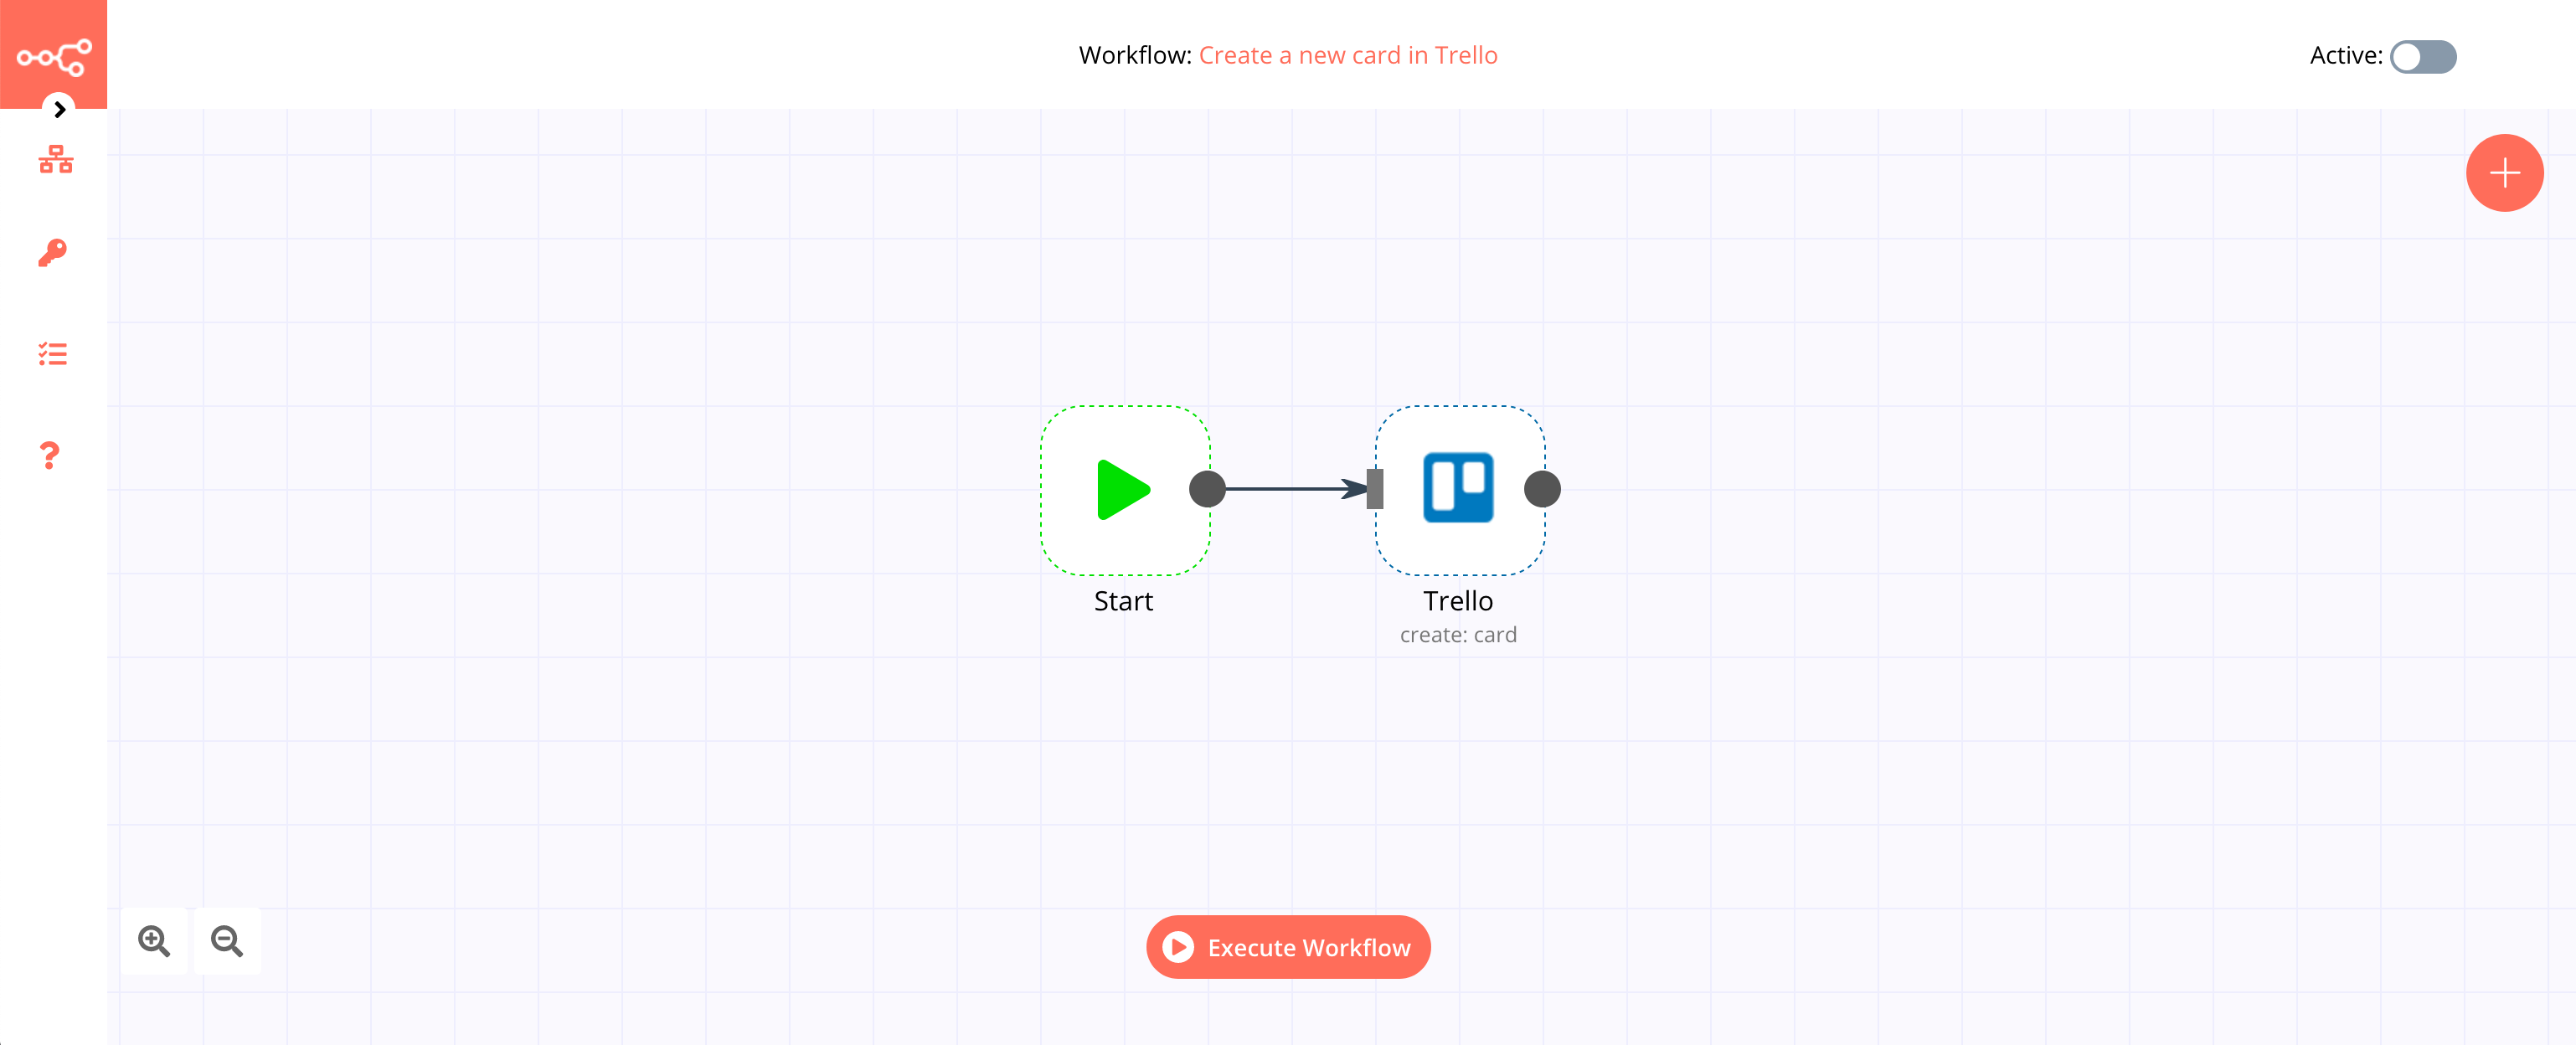 A workflow with the Trello node